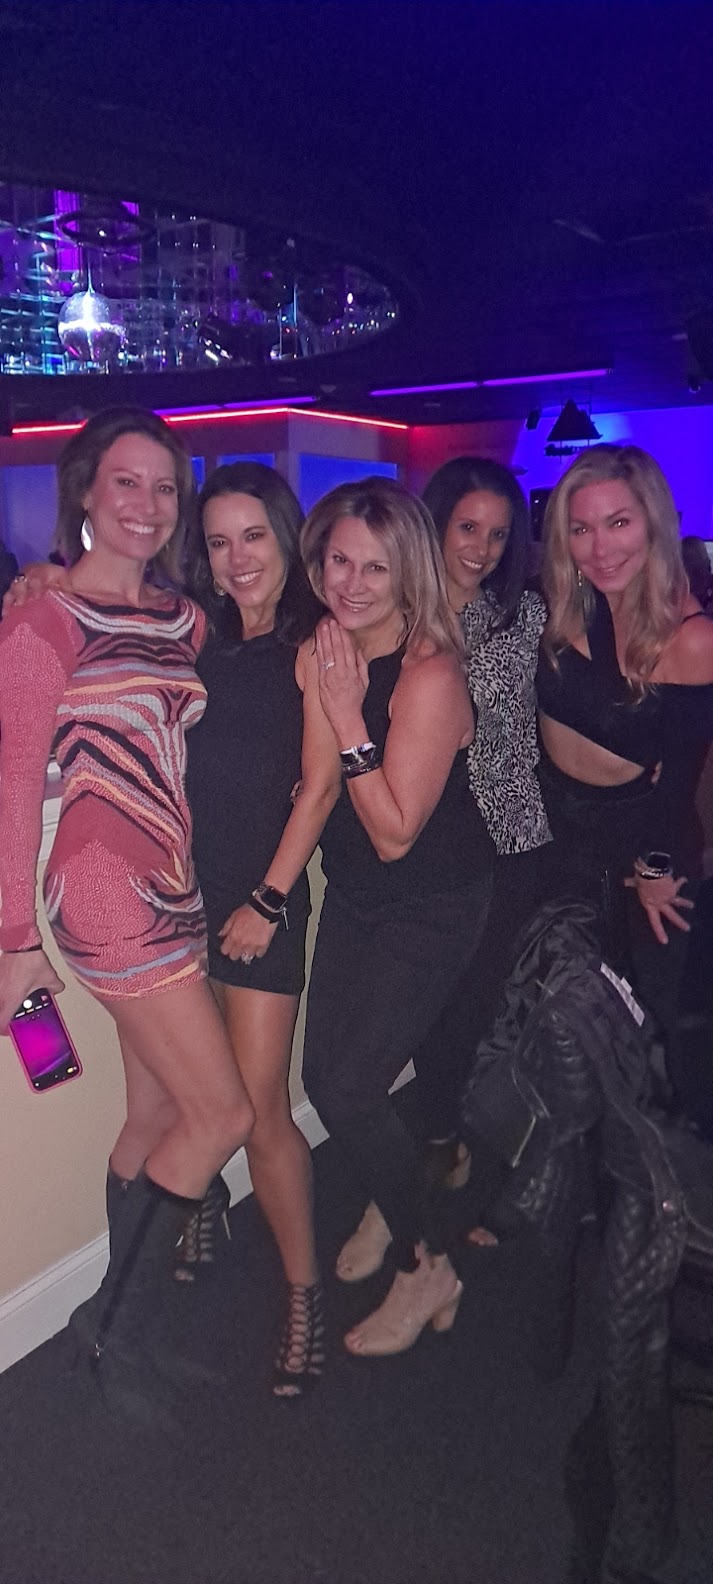 A group of women posing for a picture in a club.